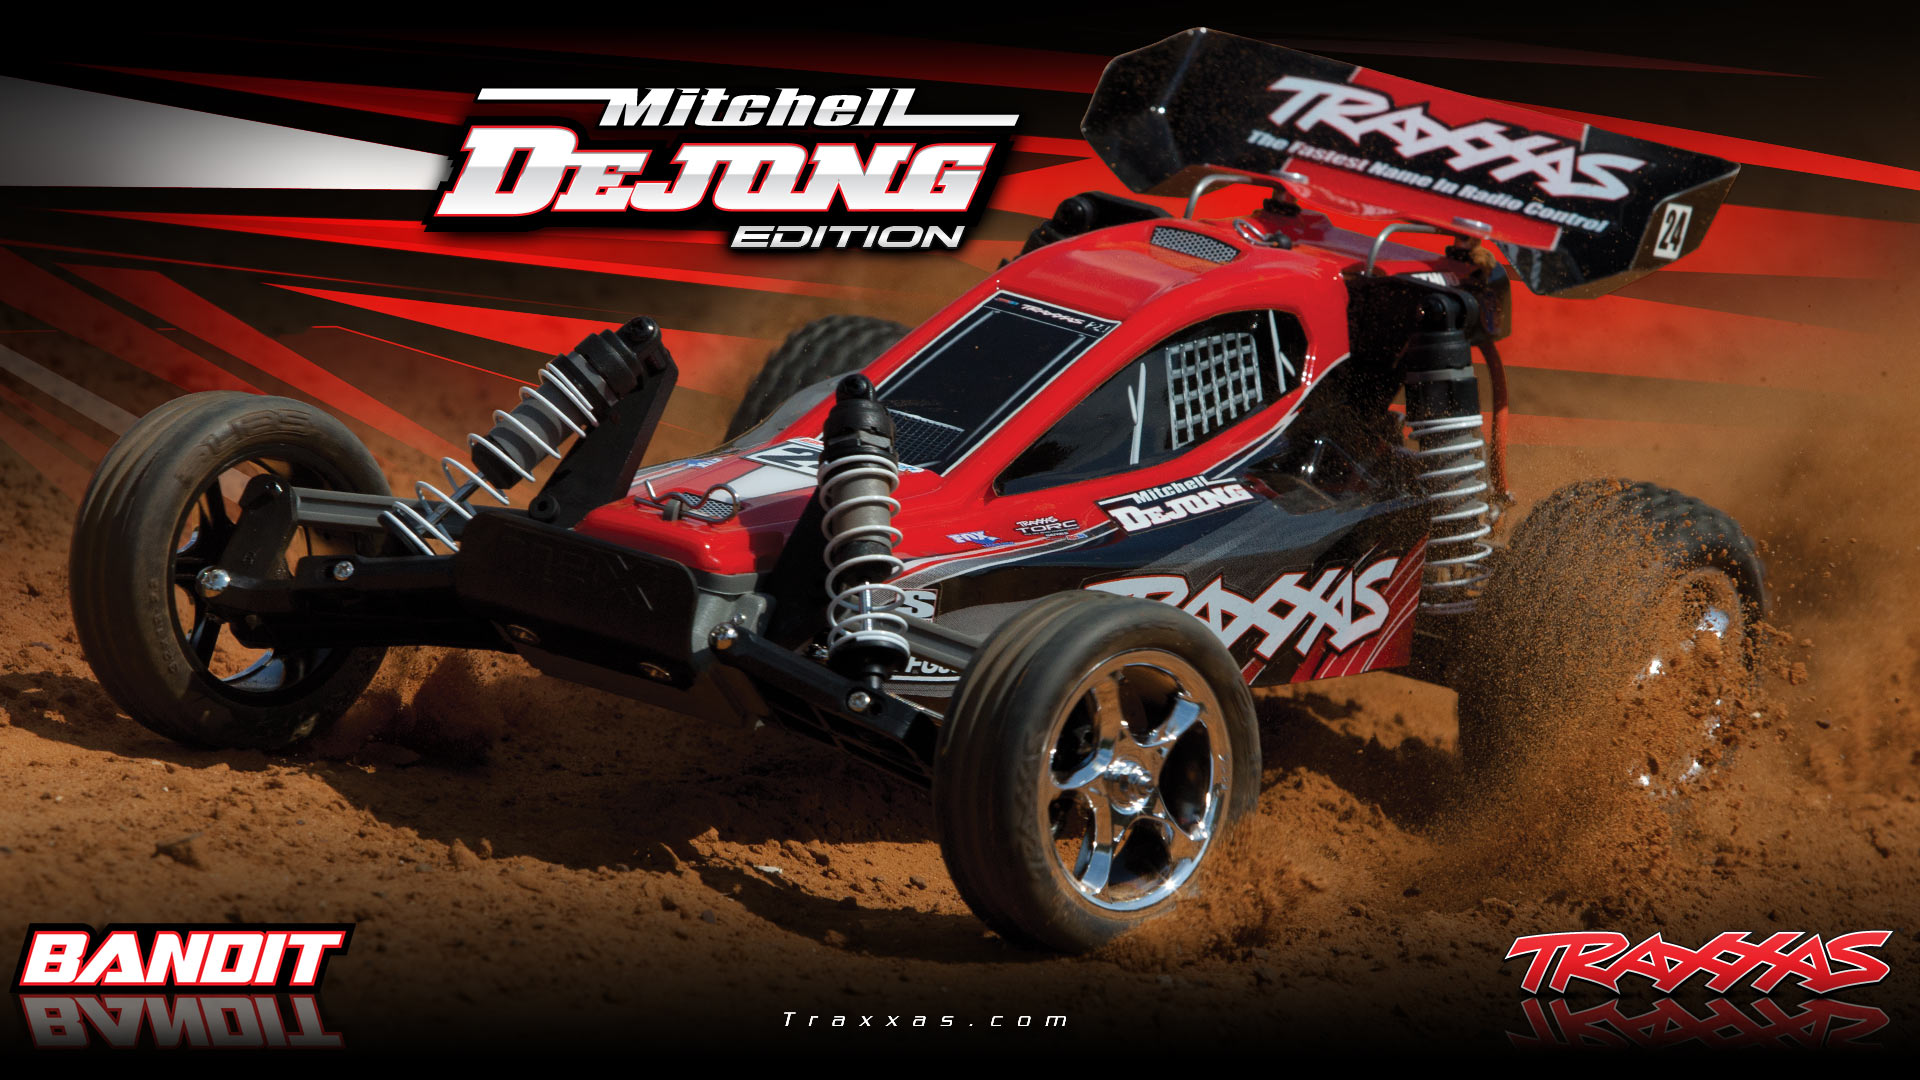 Traxxas Wallpaper Bandit Brushed Mitchell Dejong Edition